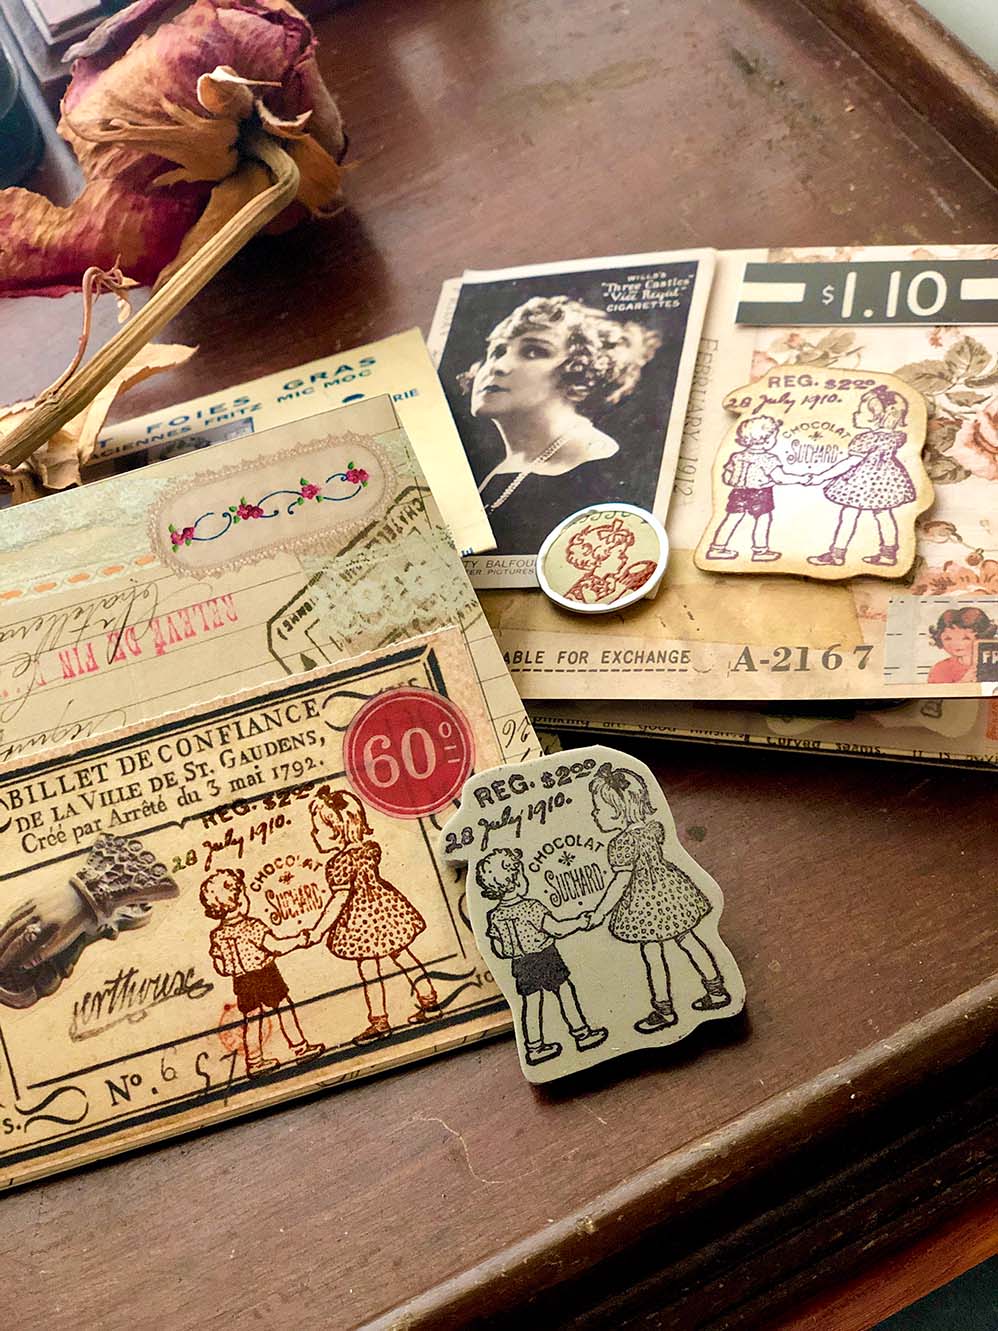 Old Chocolate Label Rubber Stamp by Mic Moc (チョコレートラベル) from micmoc.com 